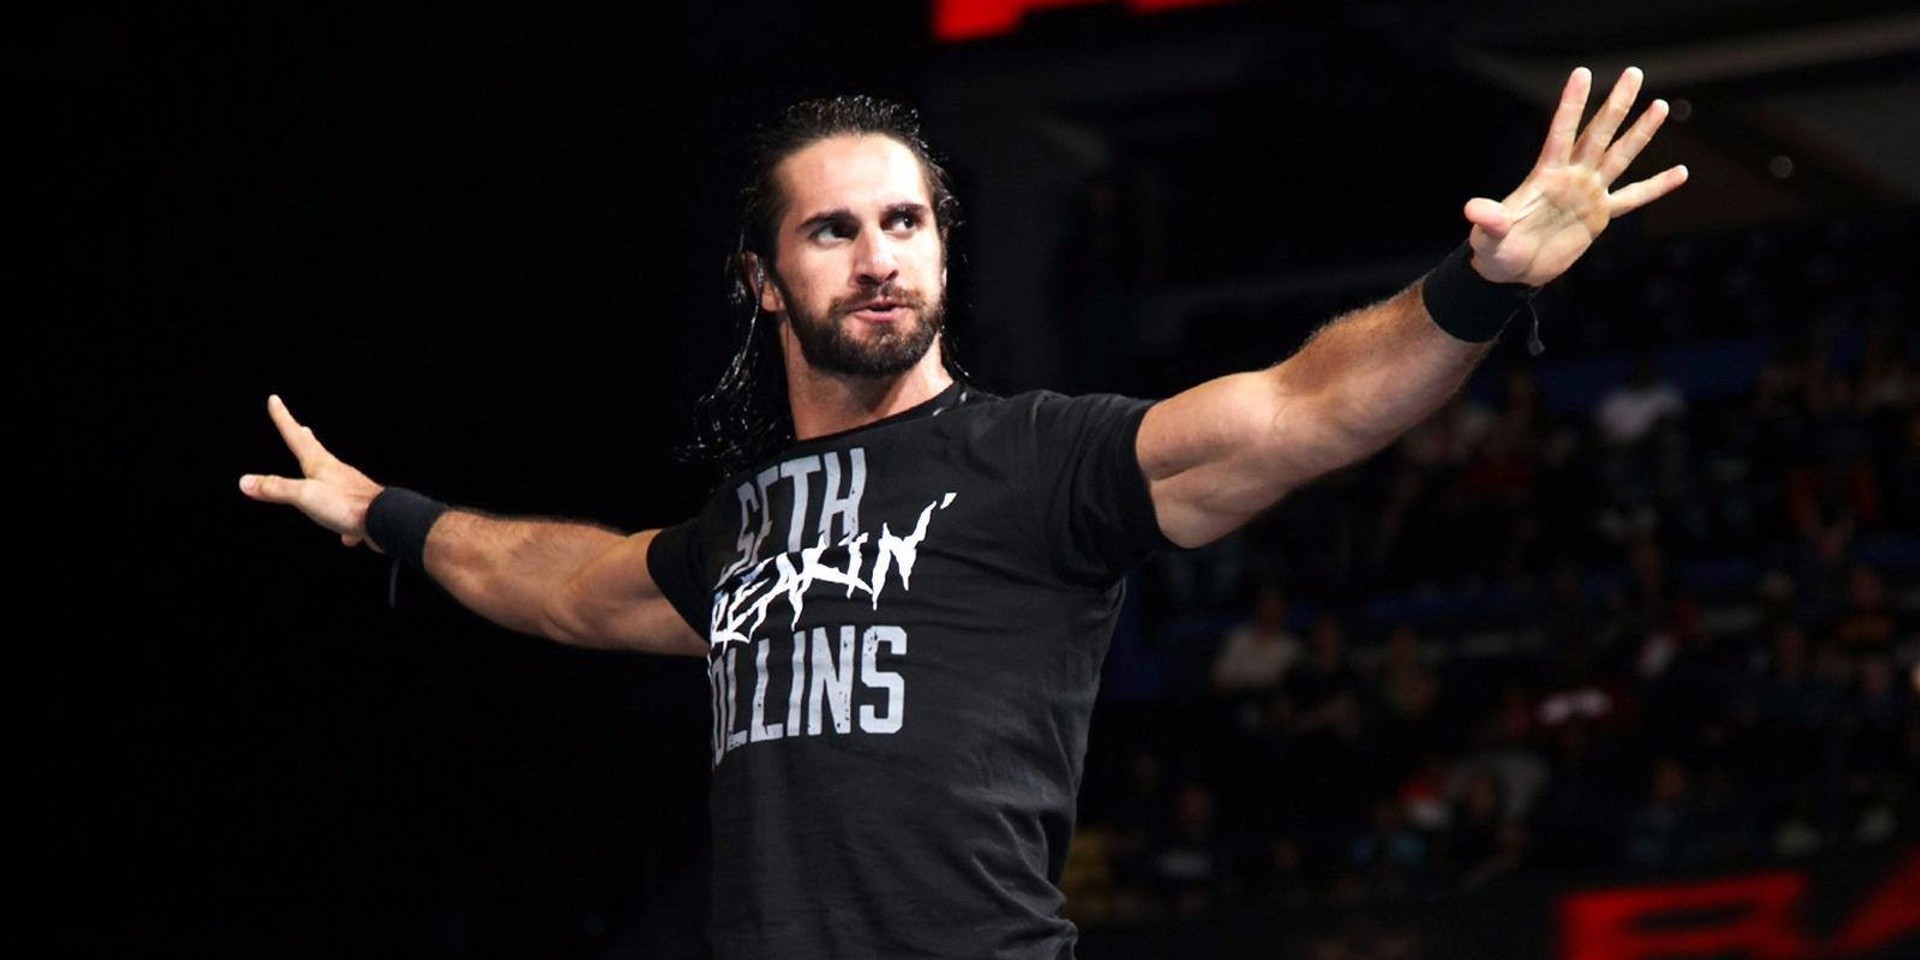 Tyler Black to Seth Rollins: the WWE Superstar describes how his themes have shaped his characters